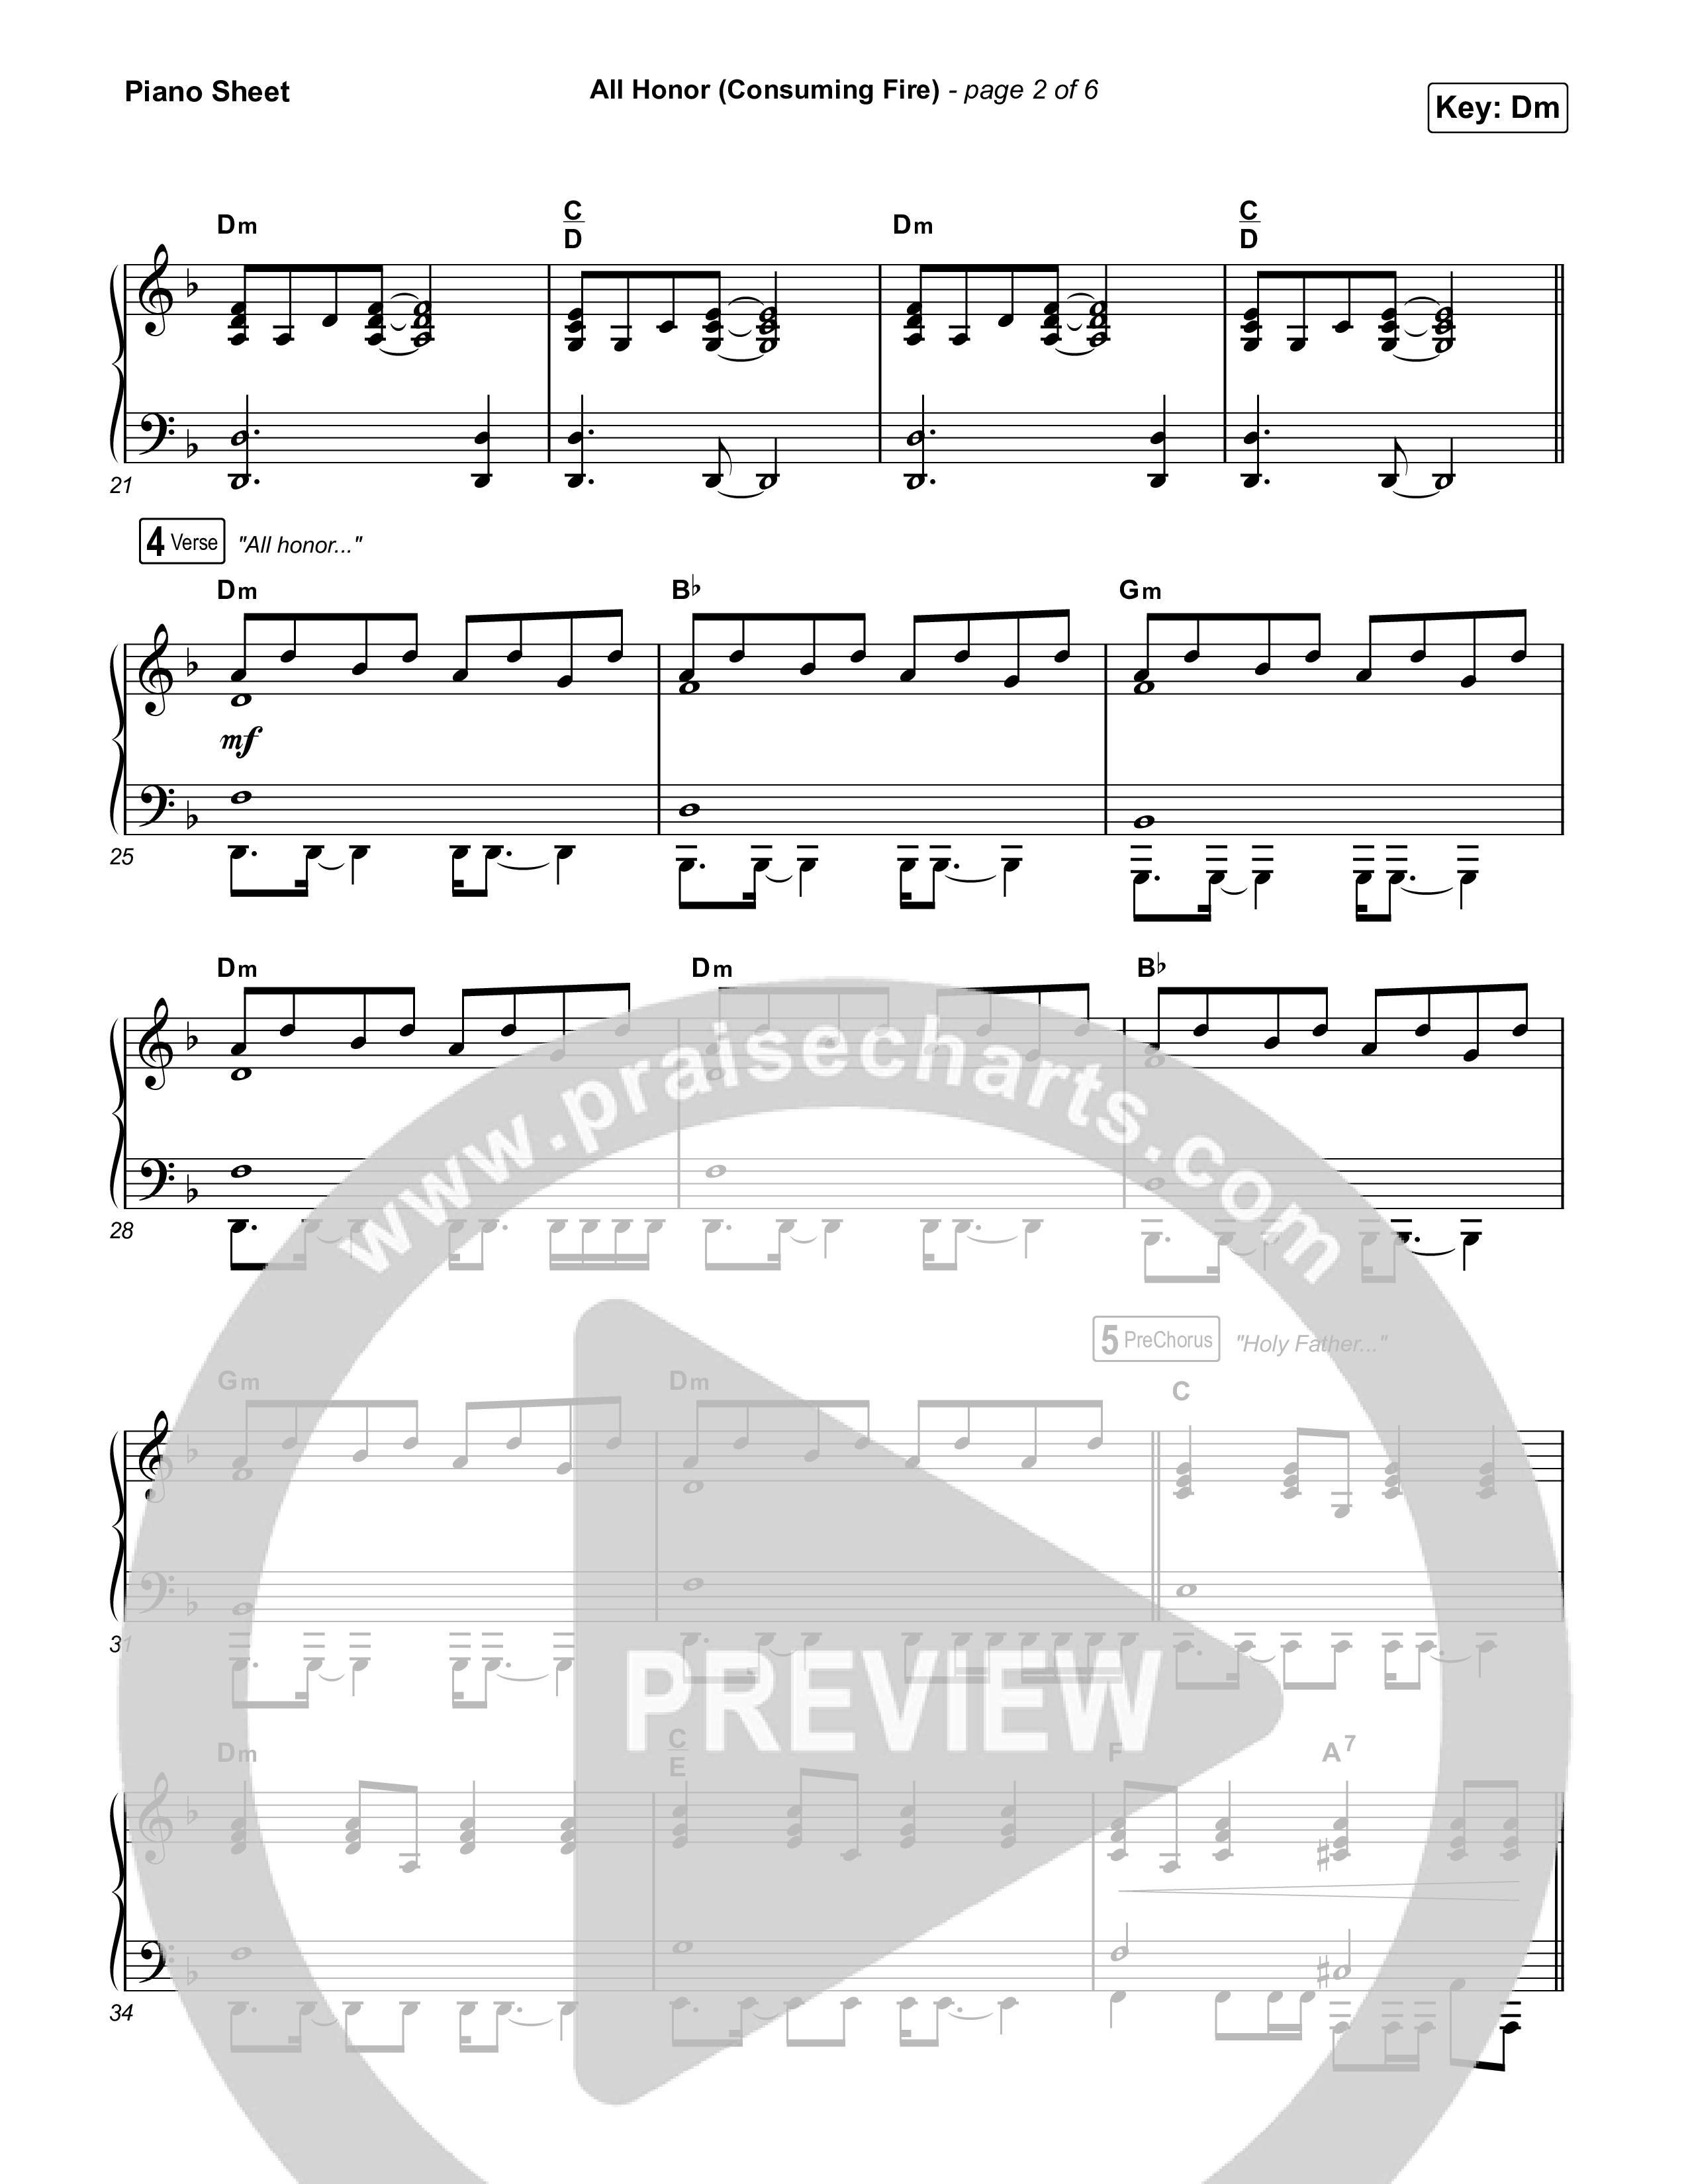 All Honor (Consuming Fire) Piano Sheet (Jesus Image)